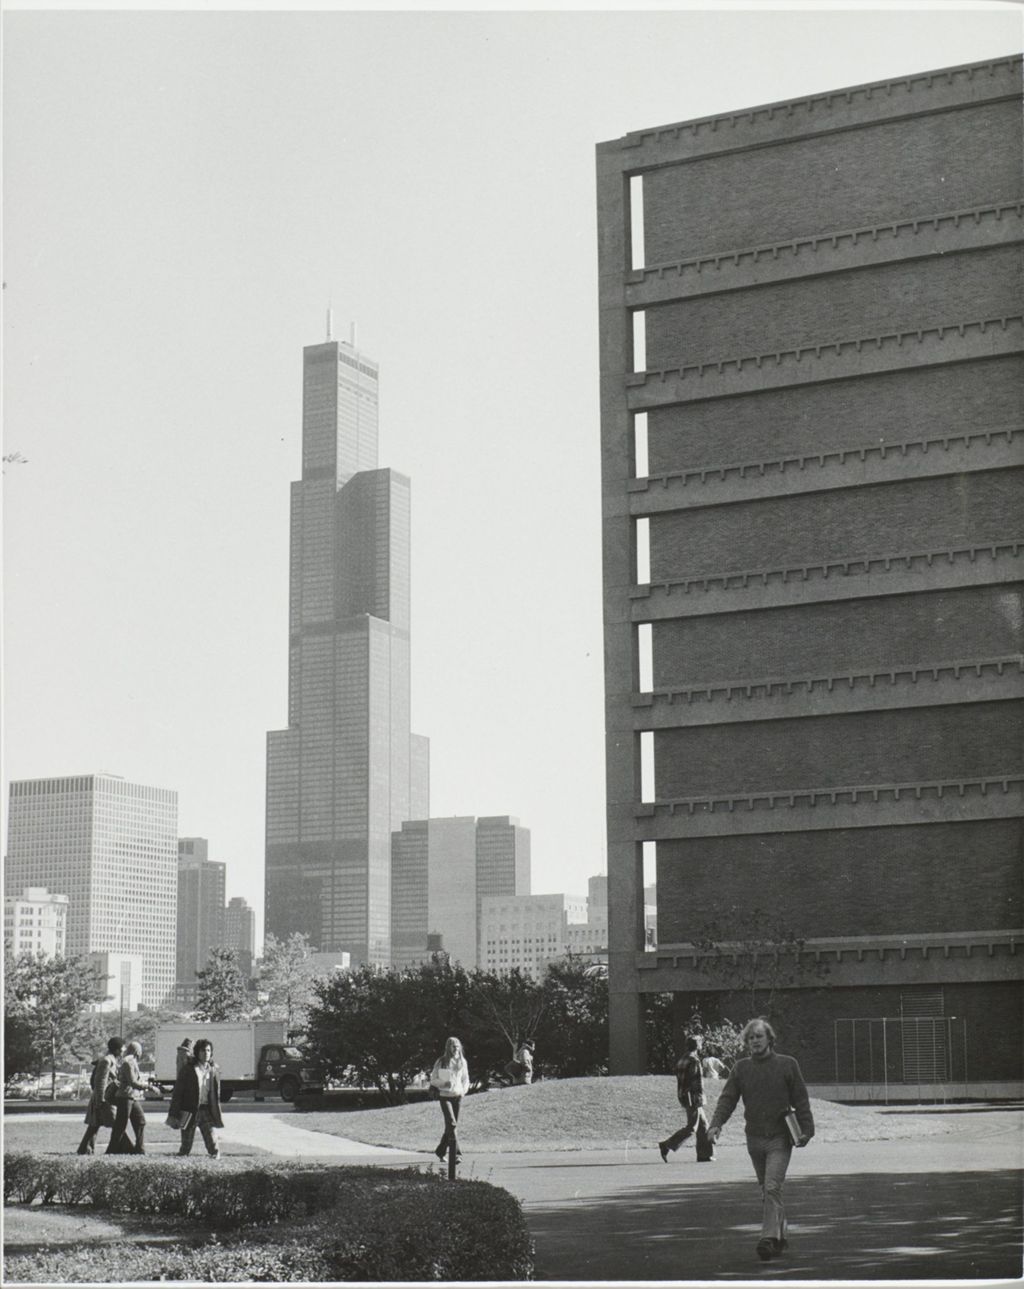 Miniature of UIC campus with Willis (Sears) Tower in the background